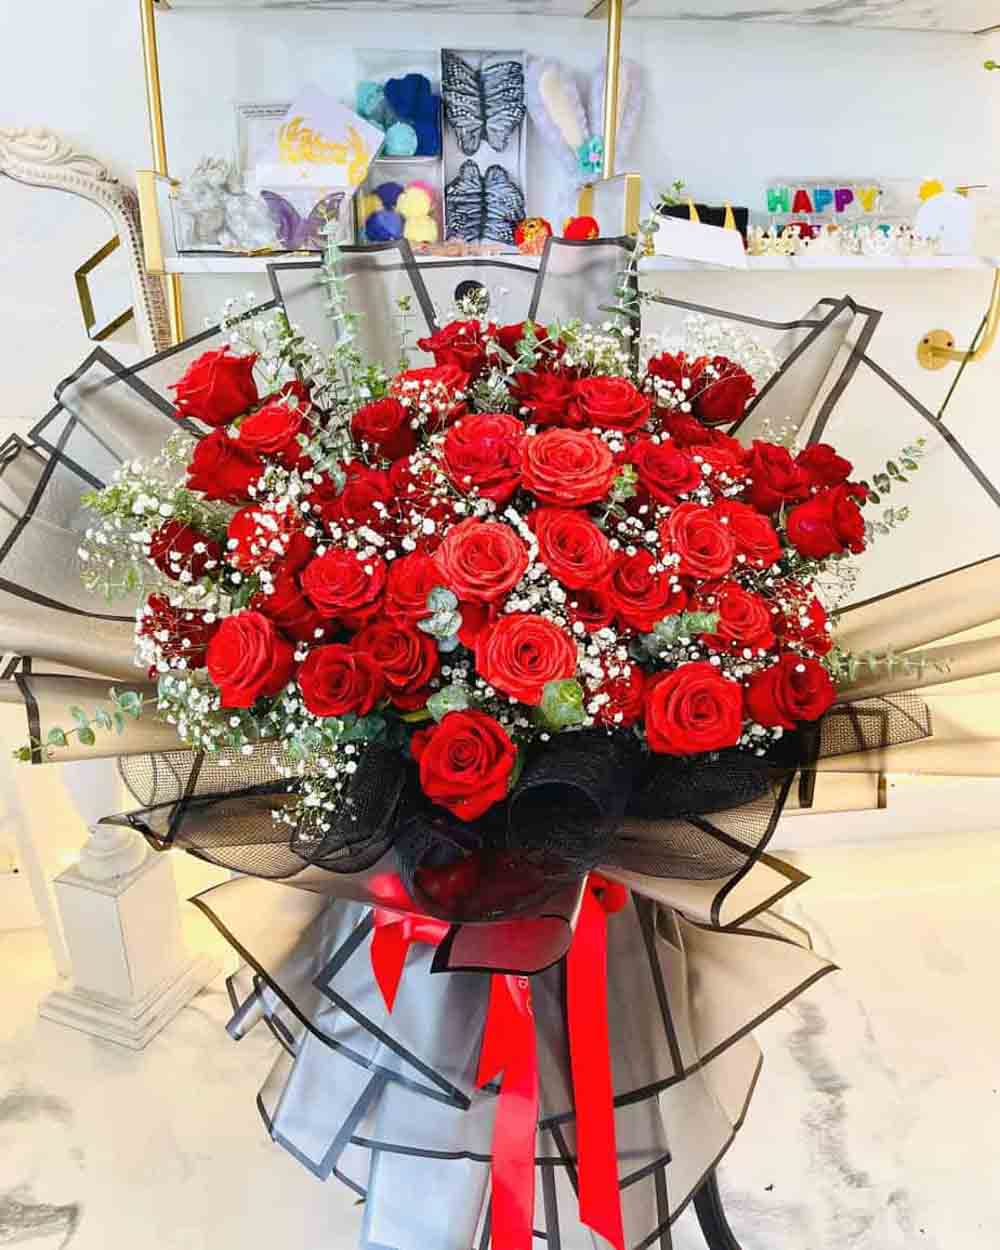 Lasting Love is a special anniversary flowers gift